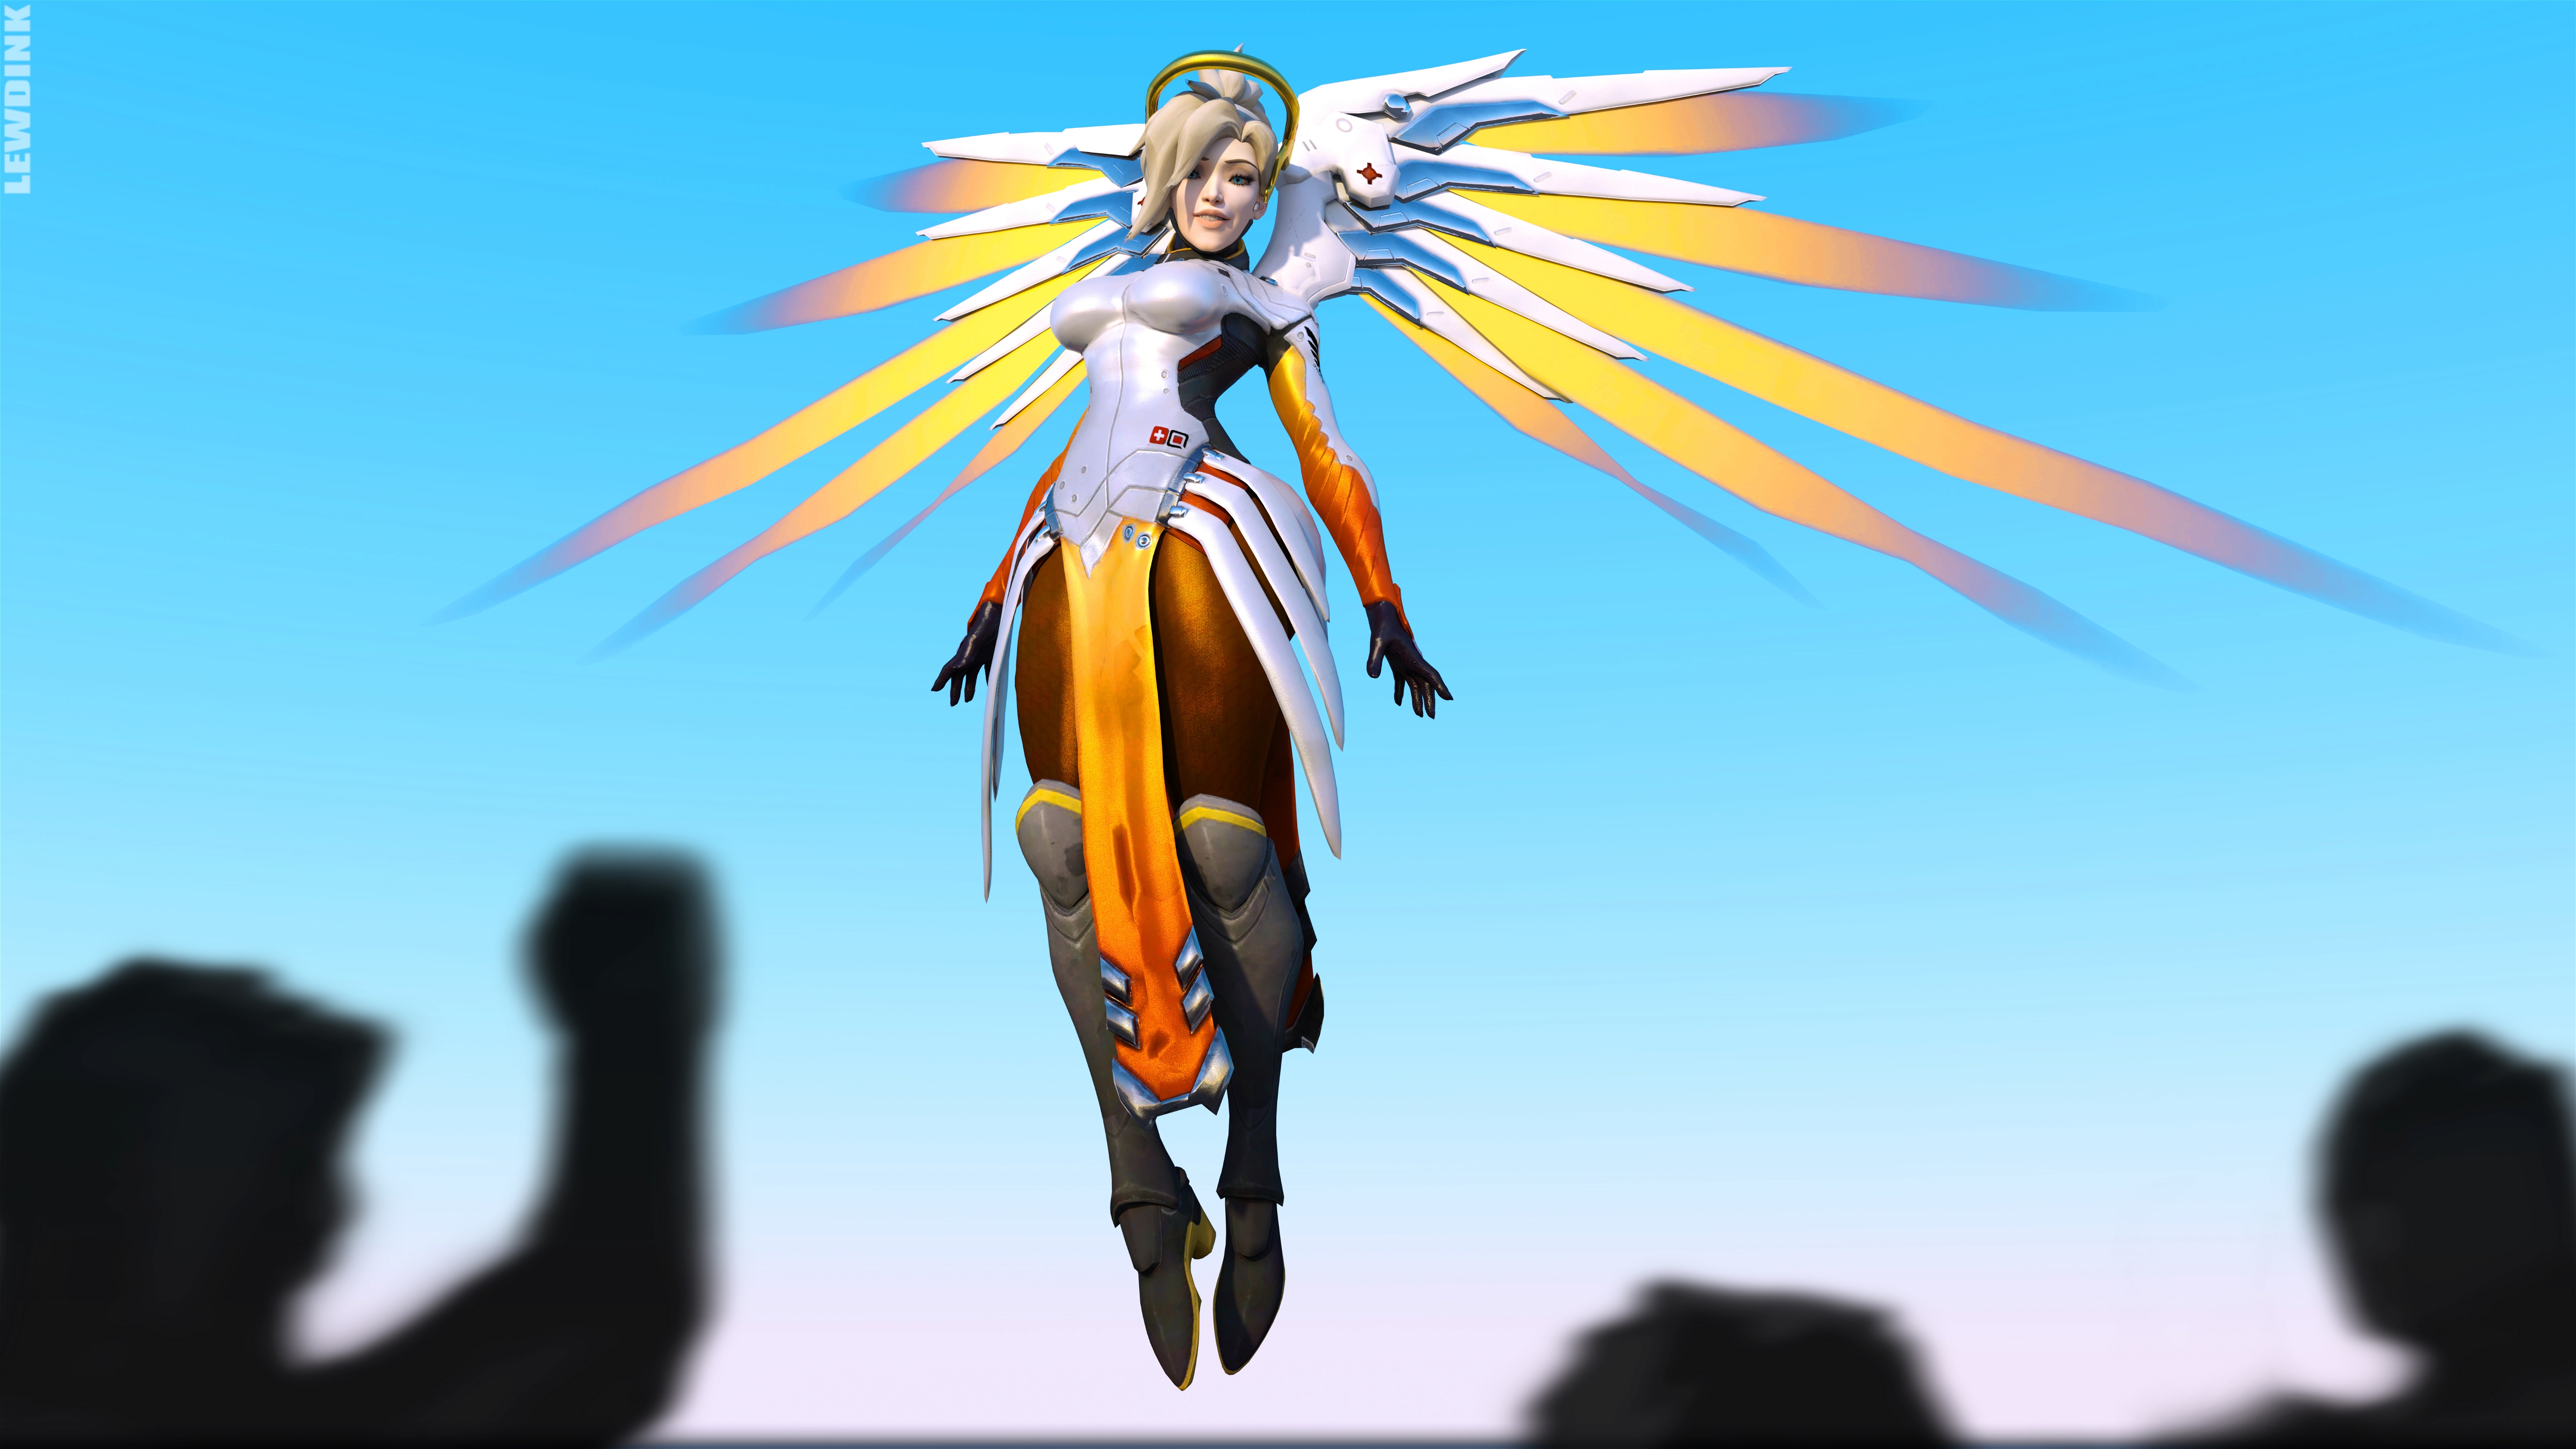 Mercy - Angel Mercy Mercyoverwatch Overwatch Muscular Girl 3d Porn 3d Girl 3dnsfw 3dxgirls Abs Sexy Hot Bimbo Huge Boobs Huge Tits Muscles Musclegirl Pinup Perfect Body Fuck Hard Sexyhot Sexy Ass Sexy Woman Fake Tits Lips Latex Flexible Smirking Big Tits Huge Ass Big Booty Booty Fit Fitness Thicc Mom Milf Mature Mature Woman Spread Legs Spread Thick Thighs Horny Face Short Hair Hardcore Curvy Big Ass Big boobs Big Breasts Big Butt Brown Eyes Cleavage Fishnet Stockings Fishnet Nipple Piercing Piercing Belly Button Piercing Leather Jacket Thighs Jewels Pawg Ass Red head Tribal Weapon Armor Nude Boobs Pregnant Big Balls Big Nipples Lingerie Sexy Lingerie Womb Tattoo Face Tattoo Slut Whore Bitch Comic Hotpants Shorts Long Hair Smile Blonde Graffiti Splash Body Paint Paint Squatting Japanese Korean Asian Pussy Pubic Hair Wings Flying